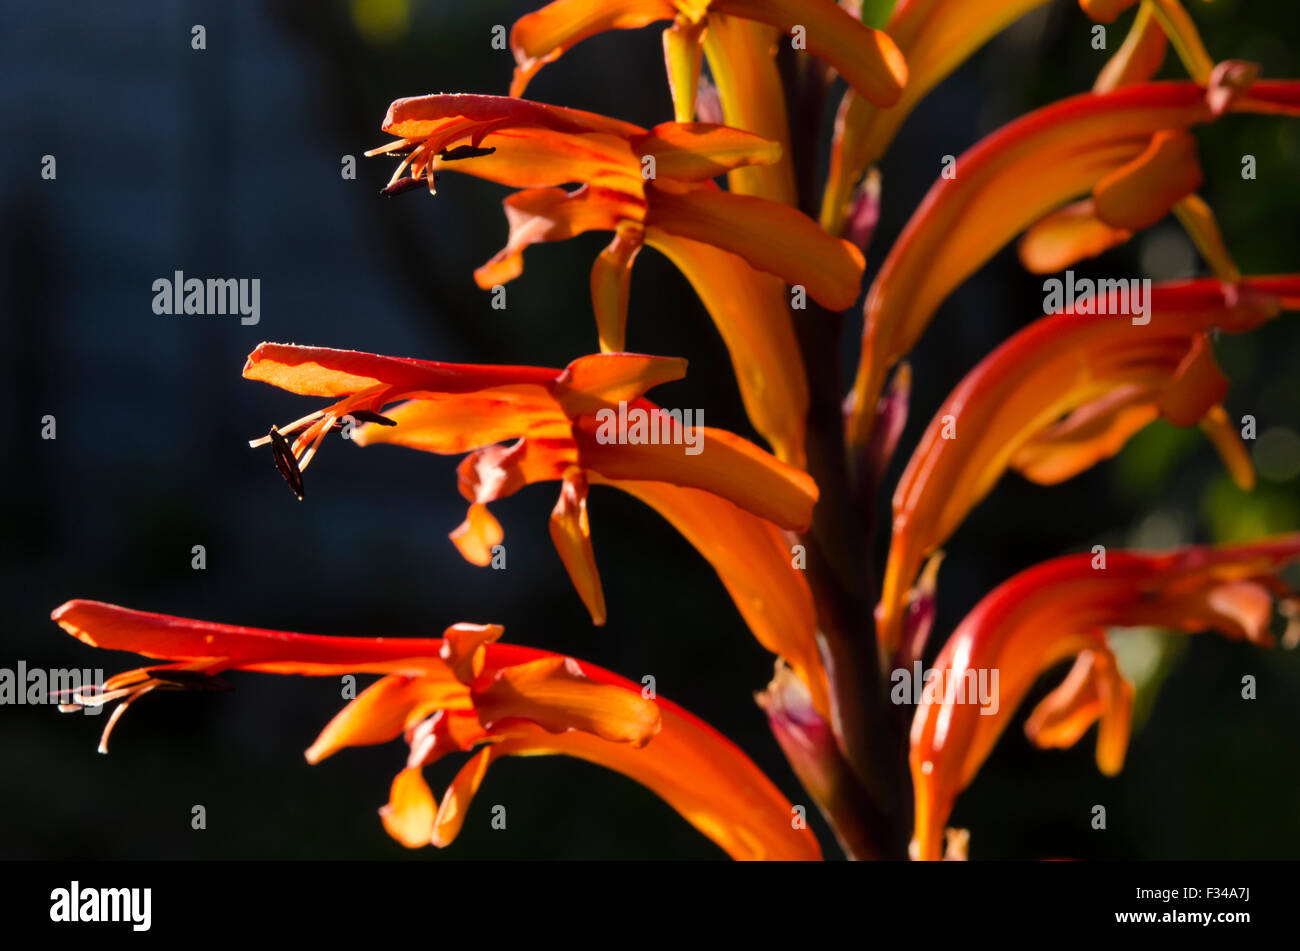 Close-up of a Watsonia flower Stock Photo